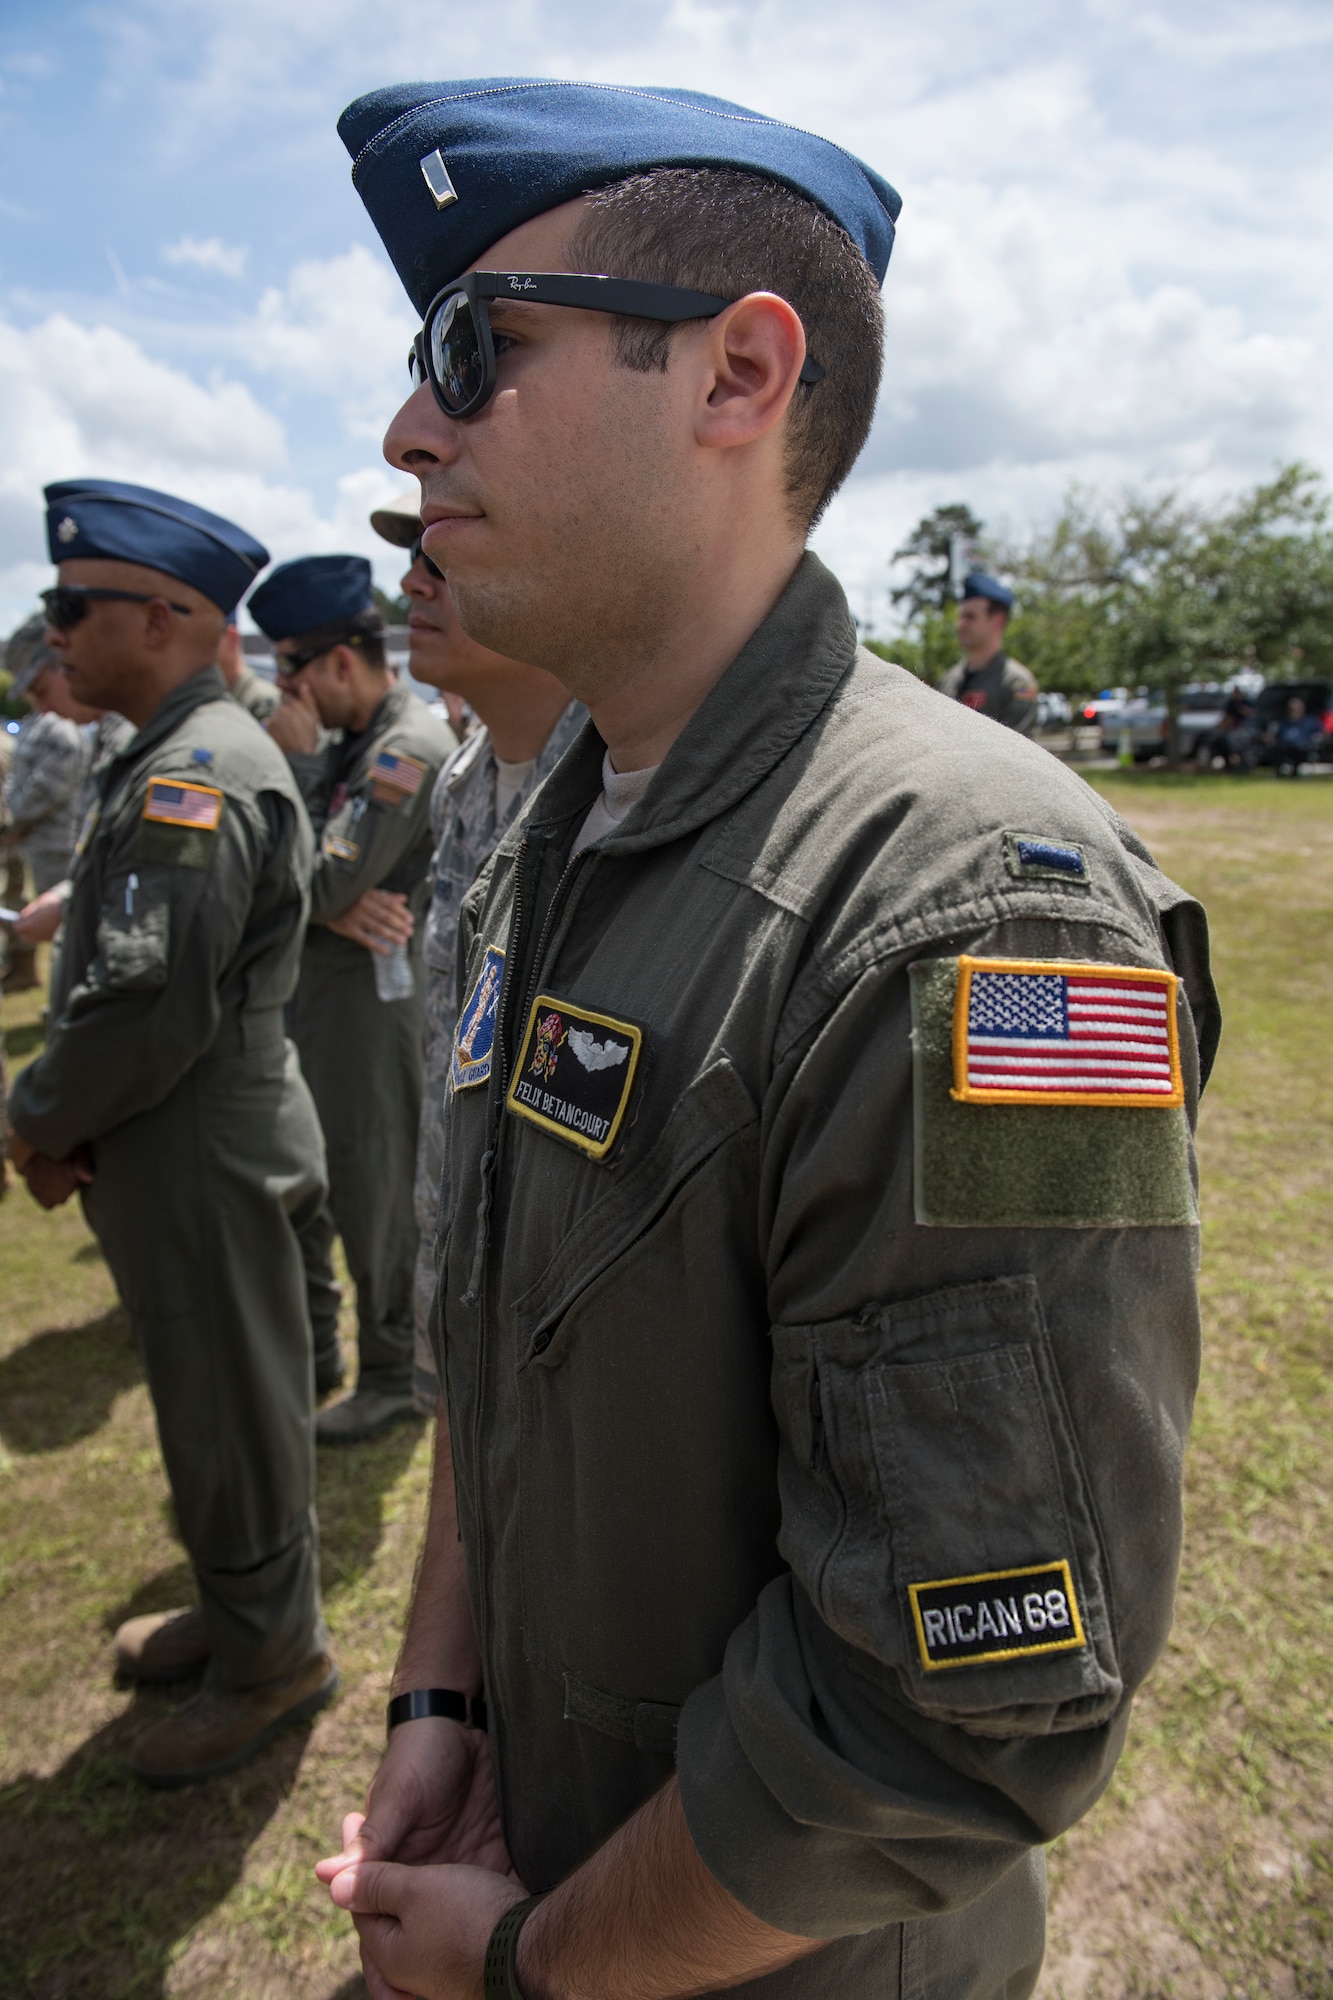 1st Lt. Felix Betancourt, 198th Airlift Squadron pilot, attends a memorial ceremony May 2, 2019 in Port Wentworth, GA. The event paid homage to the lives of the nine Puerto Rican Air National Guard Airmen who lost their lives when their C-130 Hercules, assigned to the 156th Airlift Wing, crashed May 2, 2018.